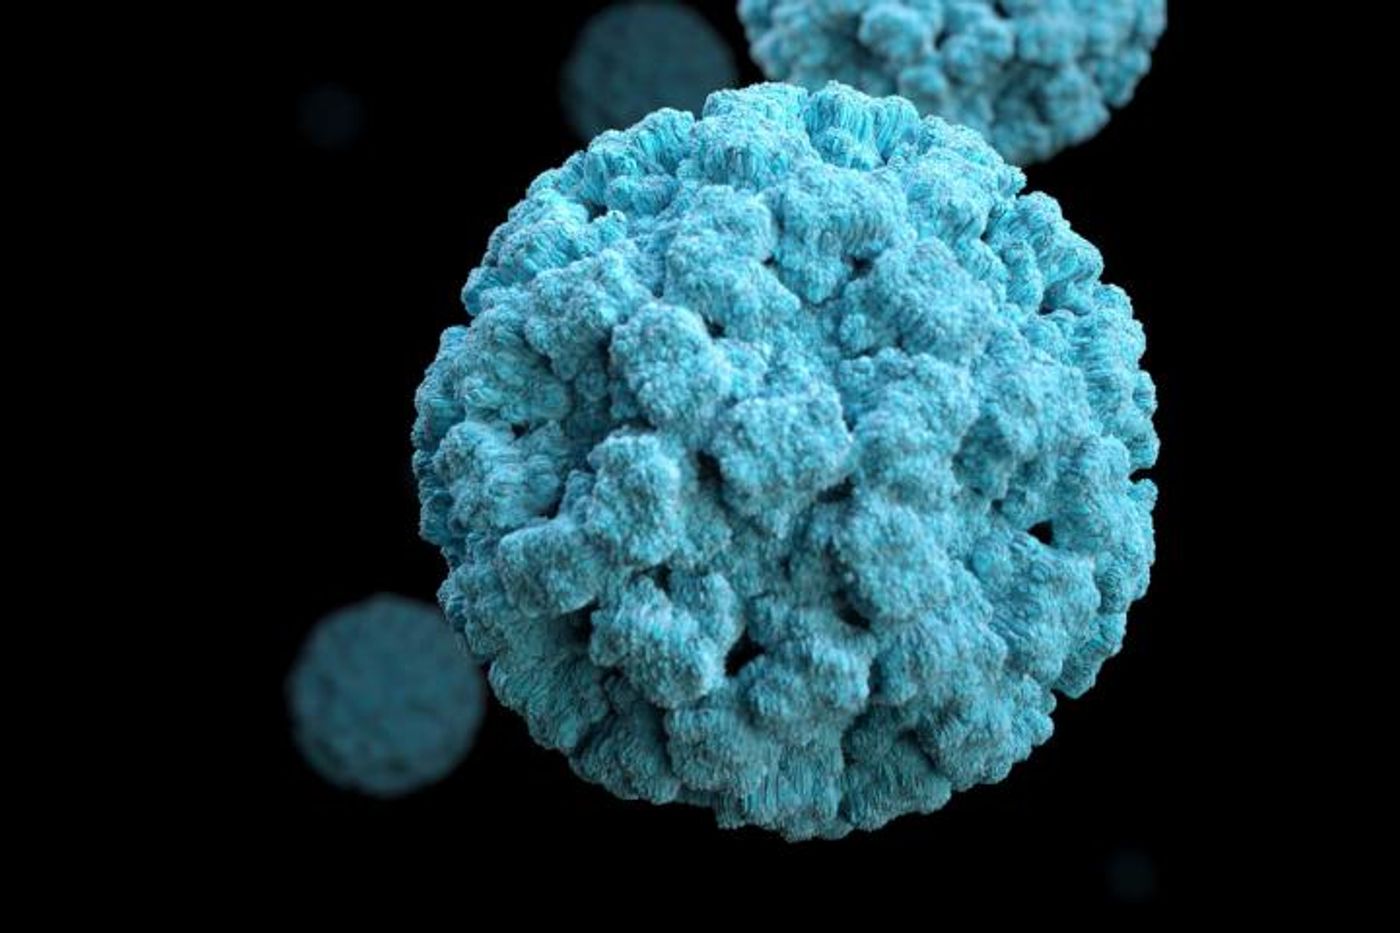 Researchers at Washington University School of Medicine in St. Louis have identified how the highly contagious norovirus infection begins, in mice. Norovirus (pictured above) is a major cause of gastrointestinal illness worldwide. / Credit: CDC